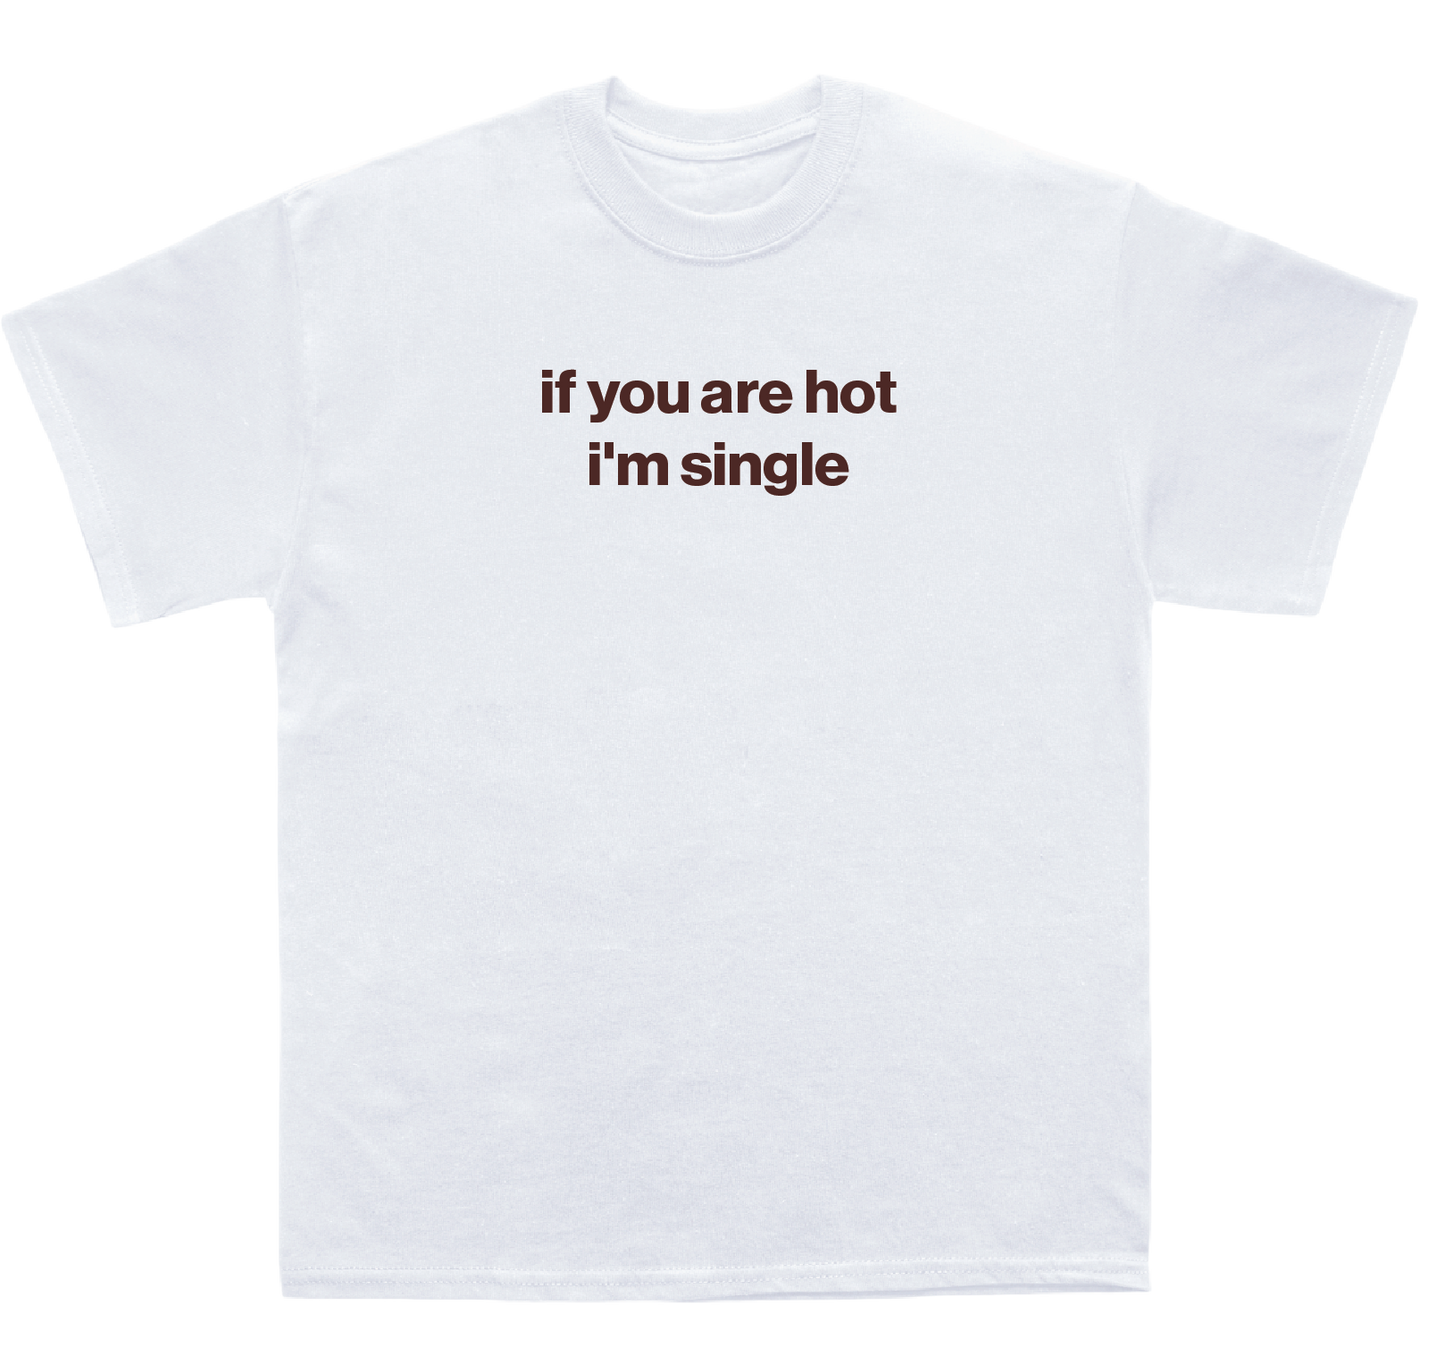 if you are hot i'm single shirt